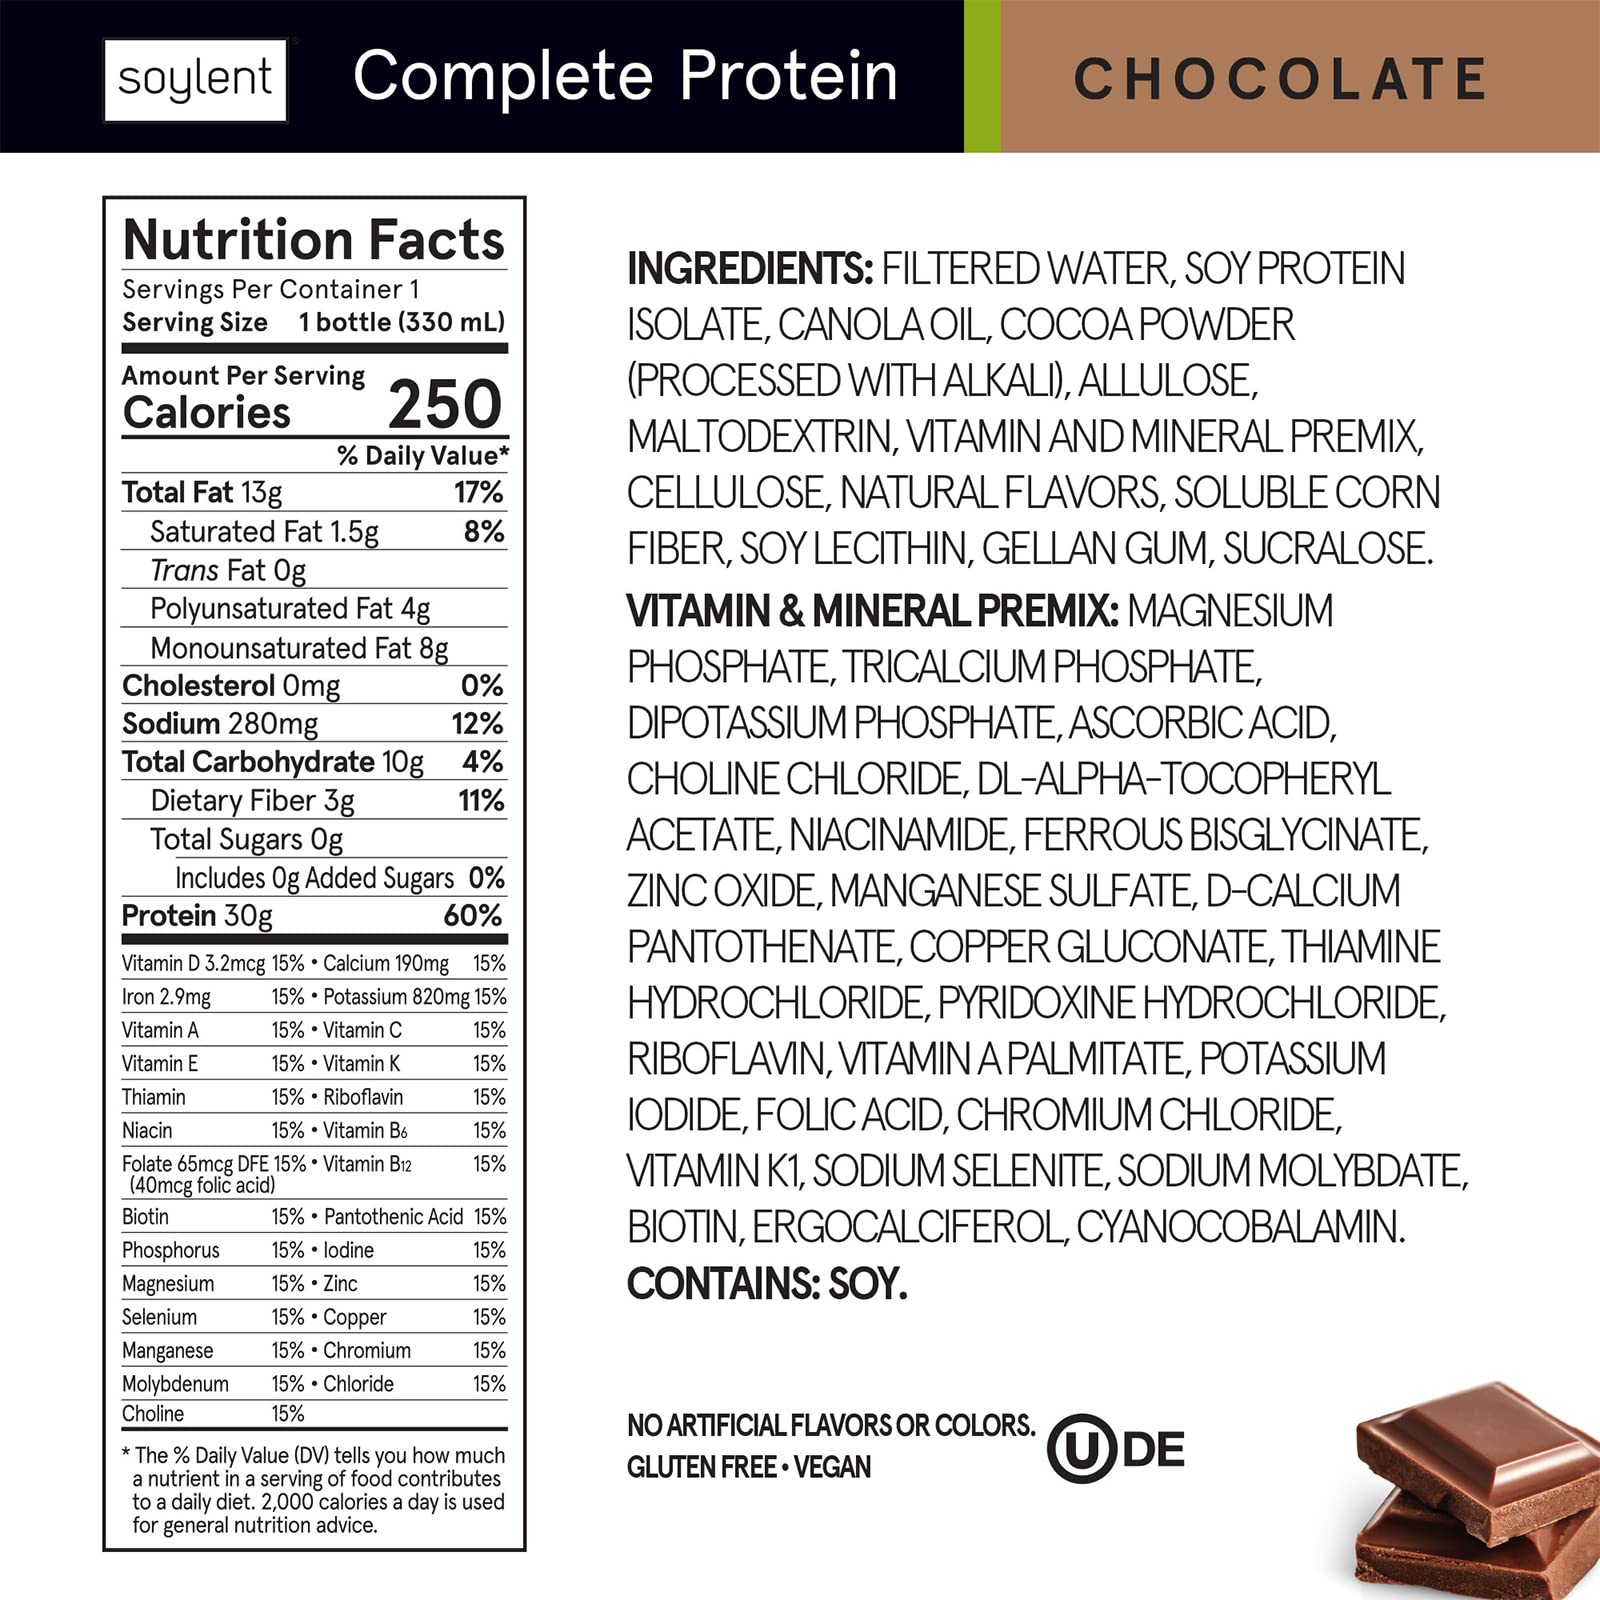 Soylent Chocolate Protein Shake, 30g Complete Protein, Vegan, Dairy Free and 0g Sugar, Ready to Drink Protein Drinks, 11 Oz (Pack of 12)